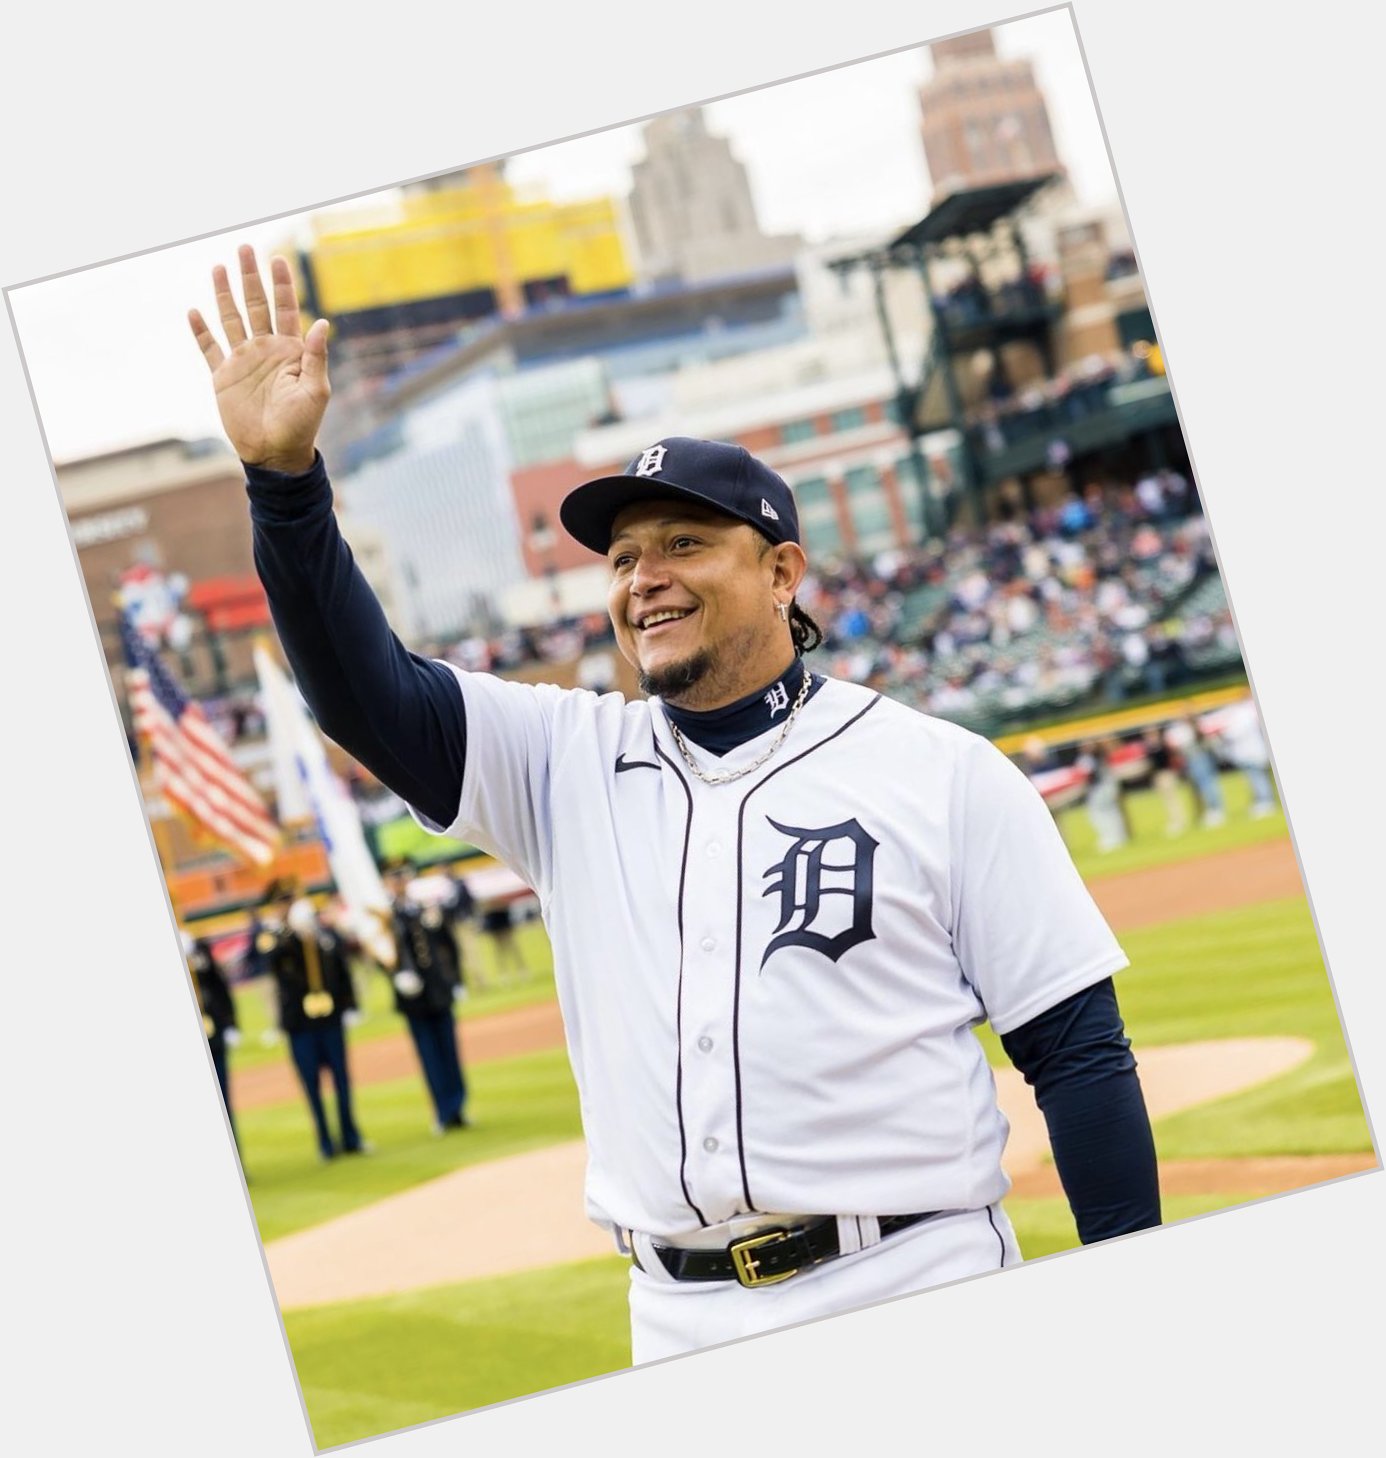 GOOD MORNING 313,

Happy Birthday to the Tigers legend himself, Miguel Cabrera   